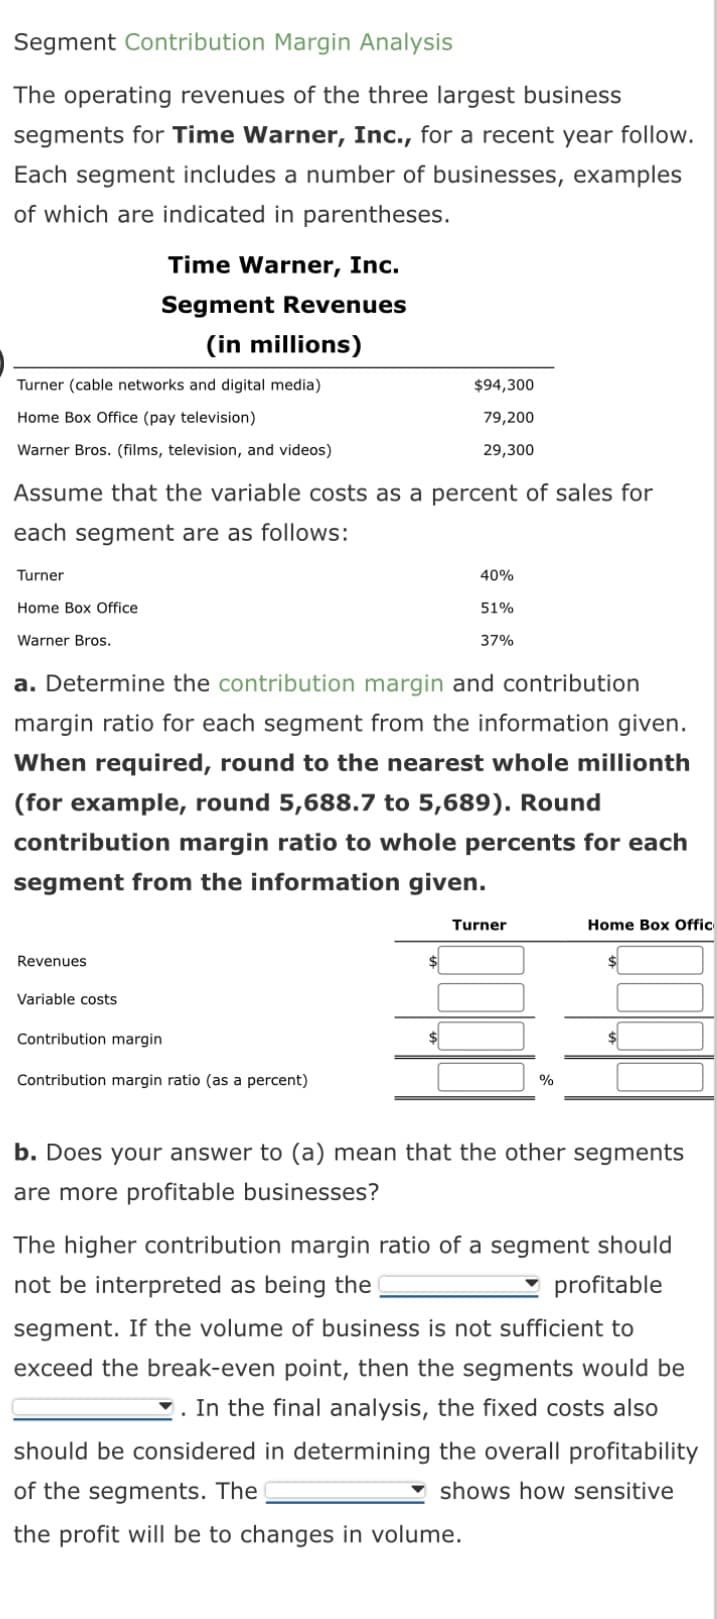 Segment Contribution Margin Analysis
The operating revenues of the three largest business
segments for Time Warner, Inc., for a recent year follow.
Each segment includes a number of businesses, examples
of which are indicated in parentheses.
Turner (cable networks and digital media)
Home Box Office (pay television)
Warner Bros. (films, television, and videos)
Turner
Home Box Office
Warner Bros.
Time Warner, Inc.
Segment Revenues
(in millions)
Assume that the variable costs as a percent of sales for
each segment are as follows:
Revenues
Variable costs
$94,300
79,200
29,300
a. Determine the contribution margin and contribution
margin ratio for each segment from the information given.
When required, round to the nearest whole millionth
(for example, round 5,688.7 to 5,689). Round
contribution margin ratio to whole percents for each
segment from the information given.
Contribution margin
Contribution margin ratio (as a percent)
40%
51%
37%
Turner
%
Home Box Offic
b. Does your answer to (a) mean that the other segments
are more profitable businesses?
The higher contribution margin ratio of a segment should
not be interpreted as being the
profitable
segment. If the volume of business is not sufficient to
exceed the break-even point, then the segments would be
. In the final analysis, the fixed costs also
should be considered in determining the overall profitability
of the segments. The
Ishows how sensitive
the profit will be to changes in volume.